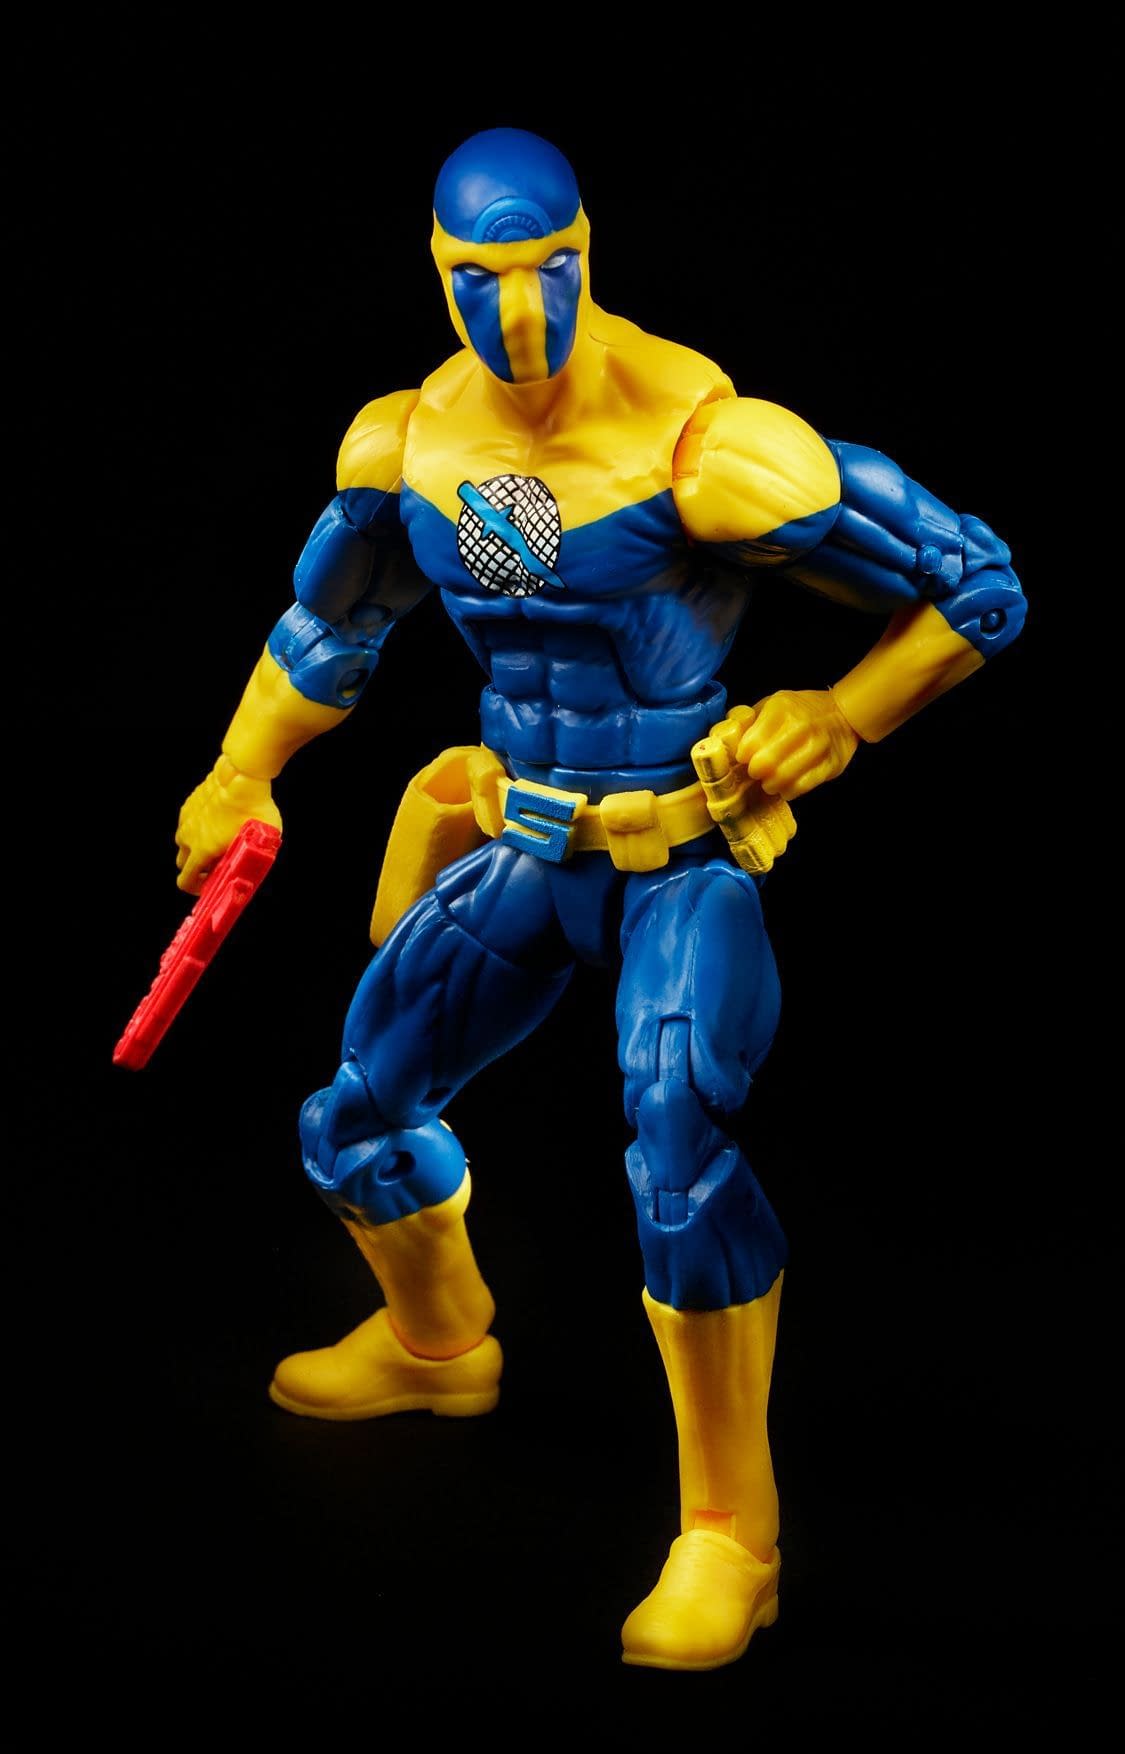 Marvel Legends Get New Characters Announced by Hasbro at LCC